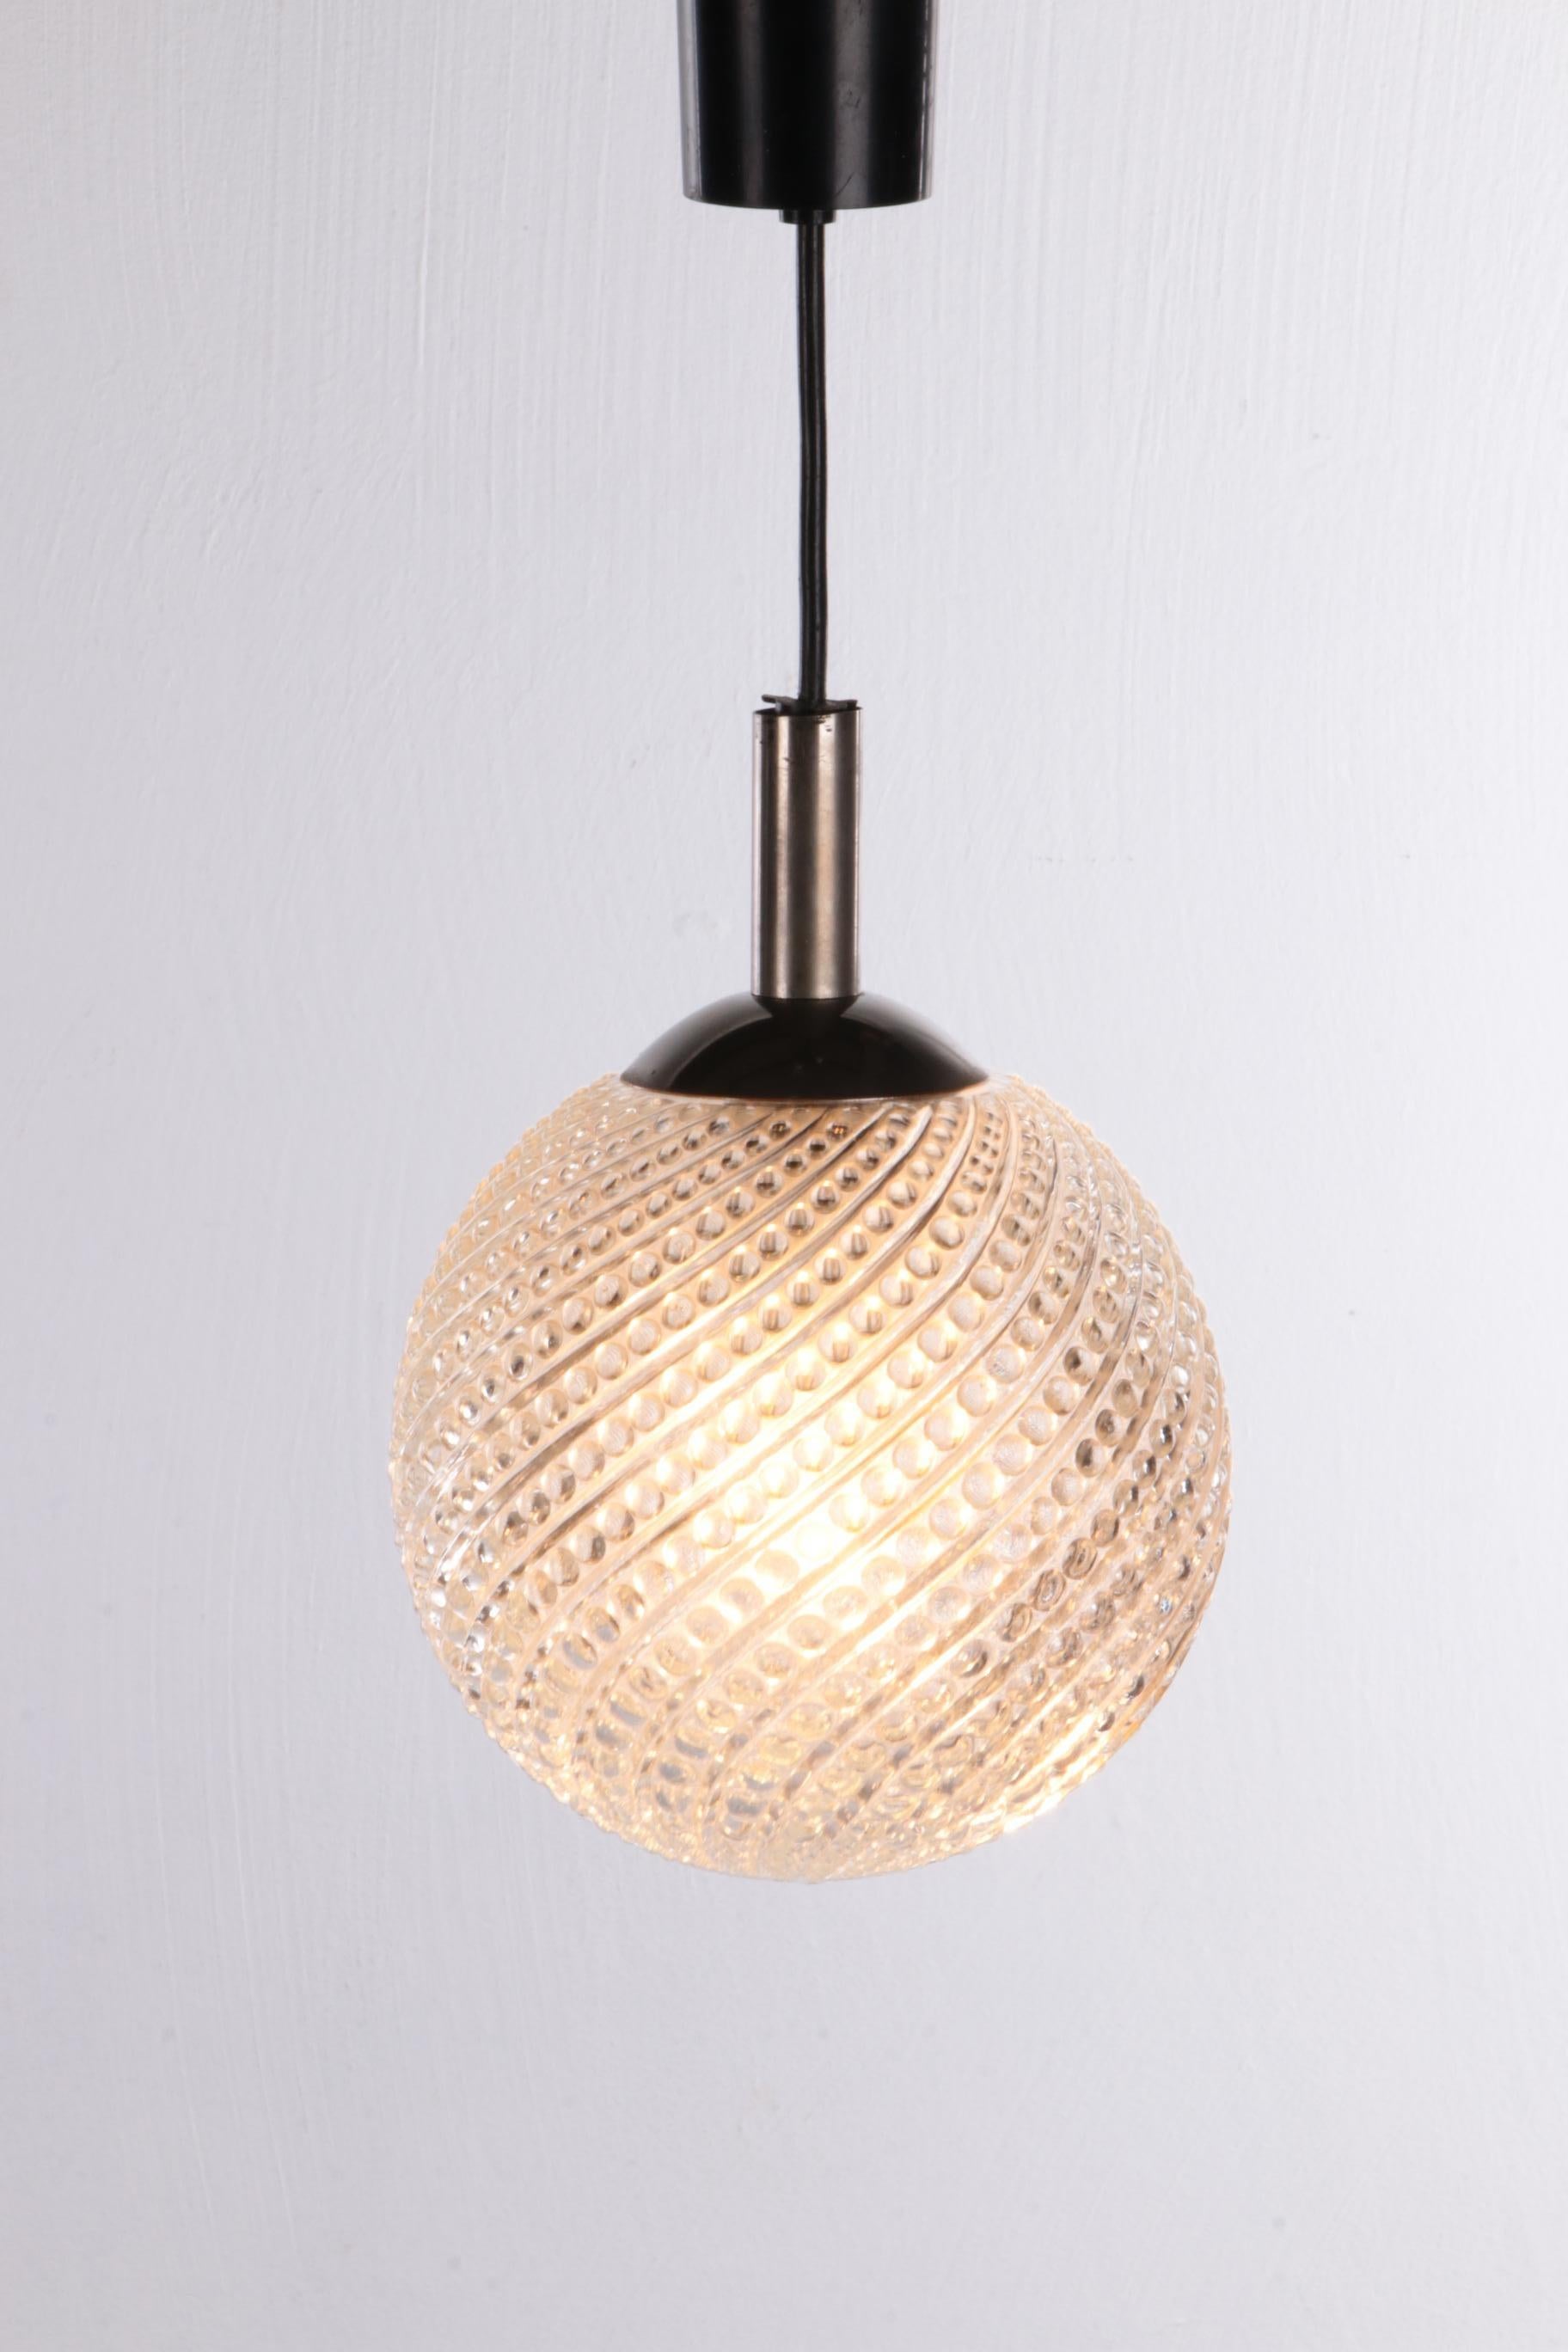 Beautiful pendant lamp from the sixties, made of metal and processed glass.

The lamp hangs from a black cord that ends in a metal fixture at the beginning of the sphere. The original glass sphere in which the light source hangs hangs from the